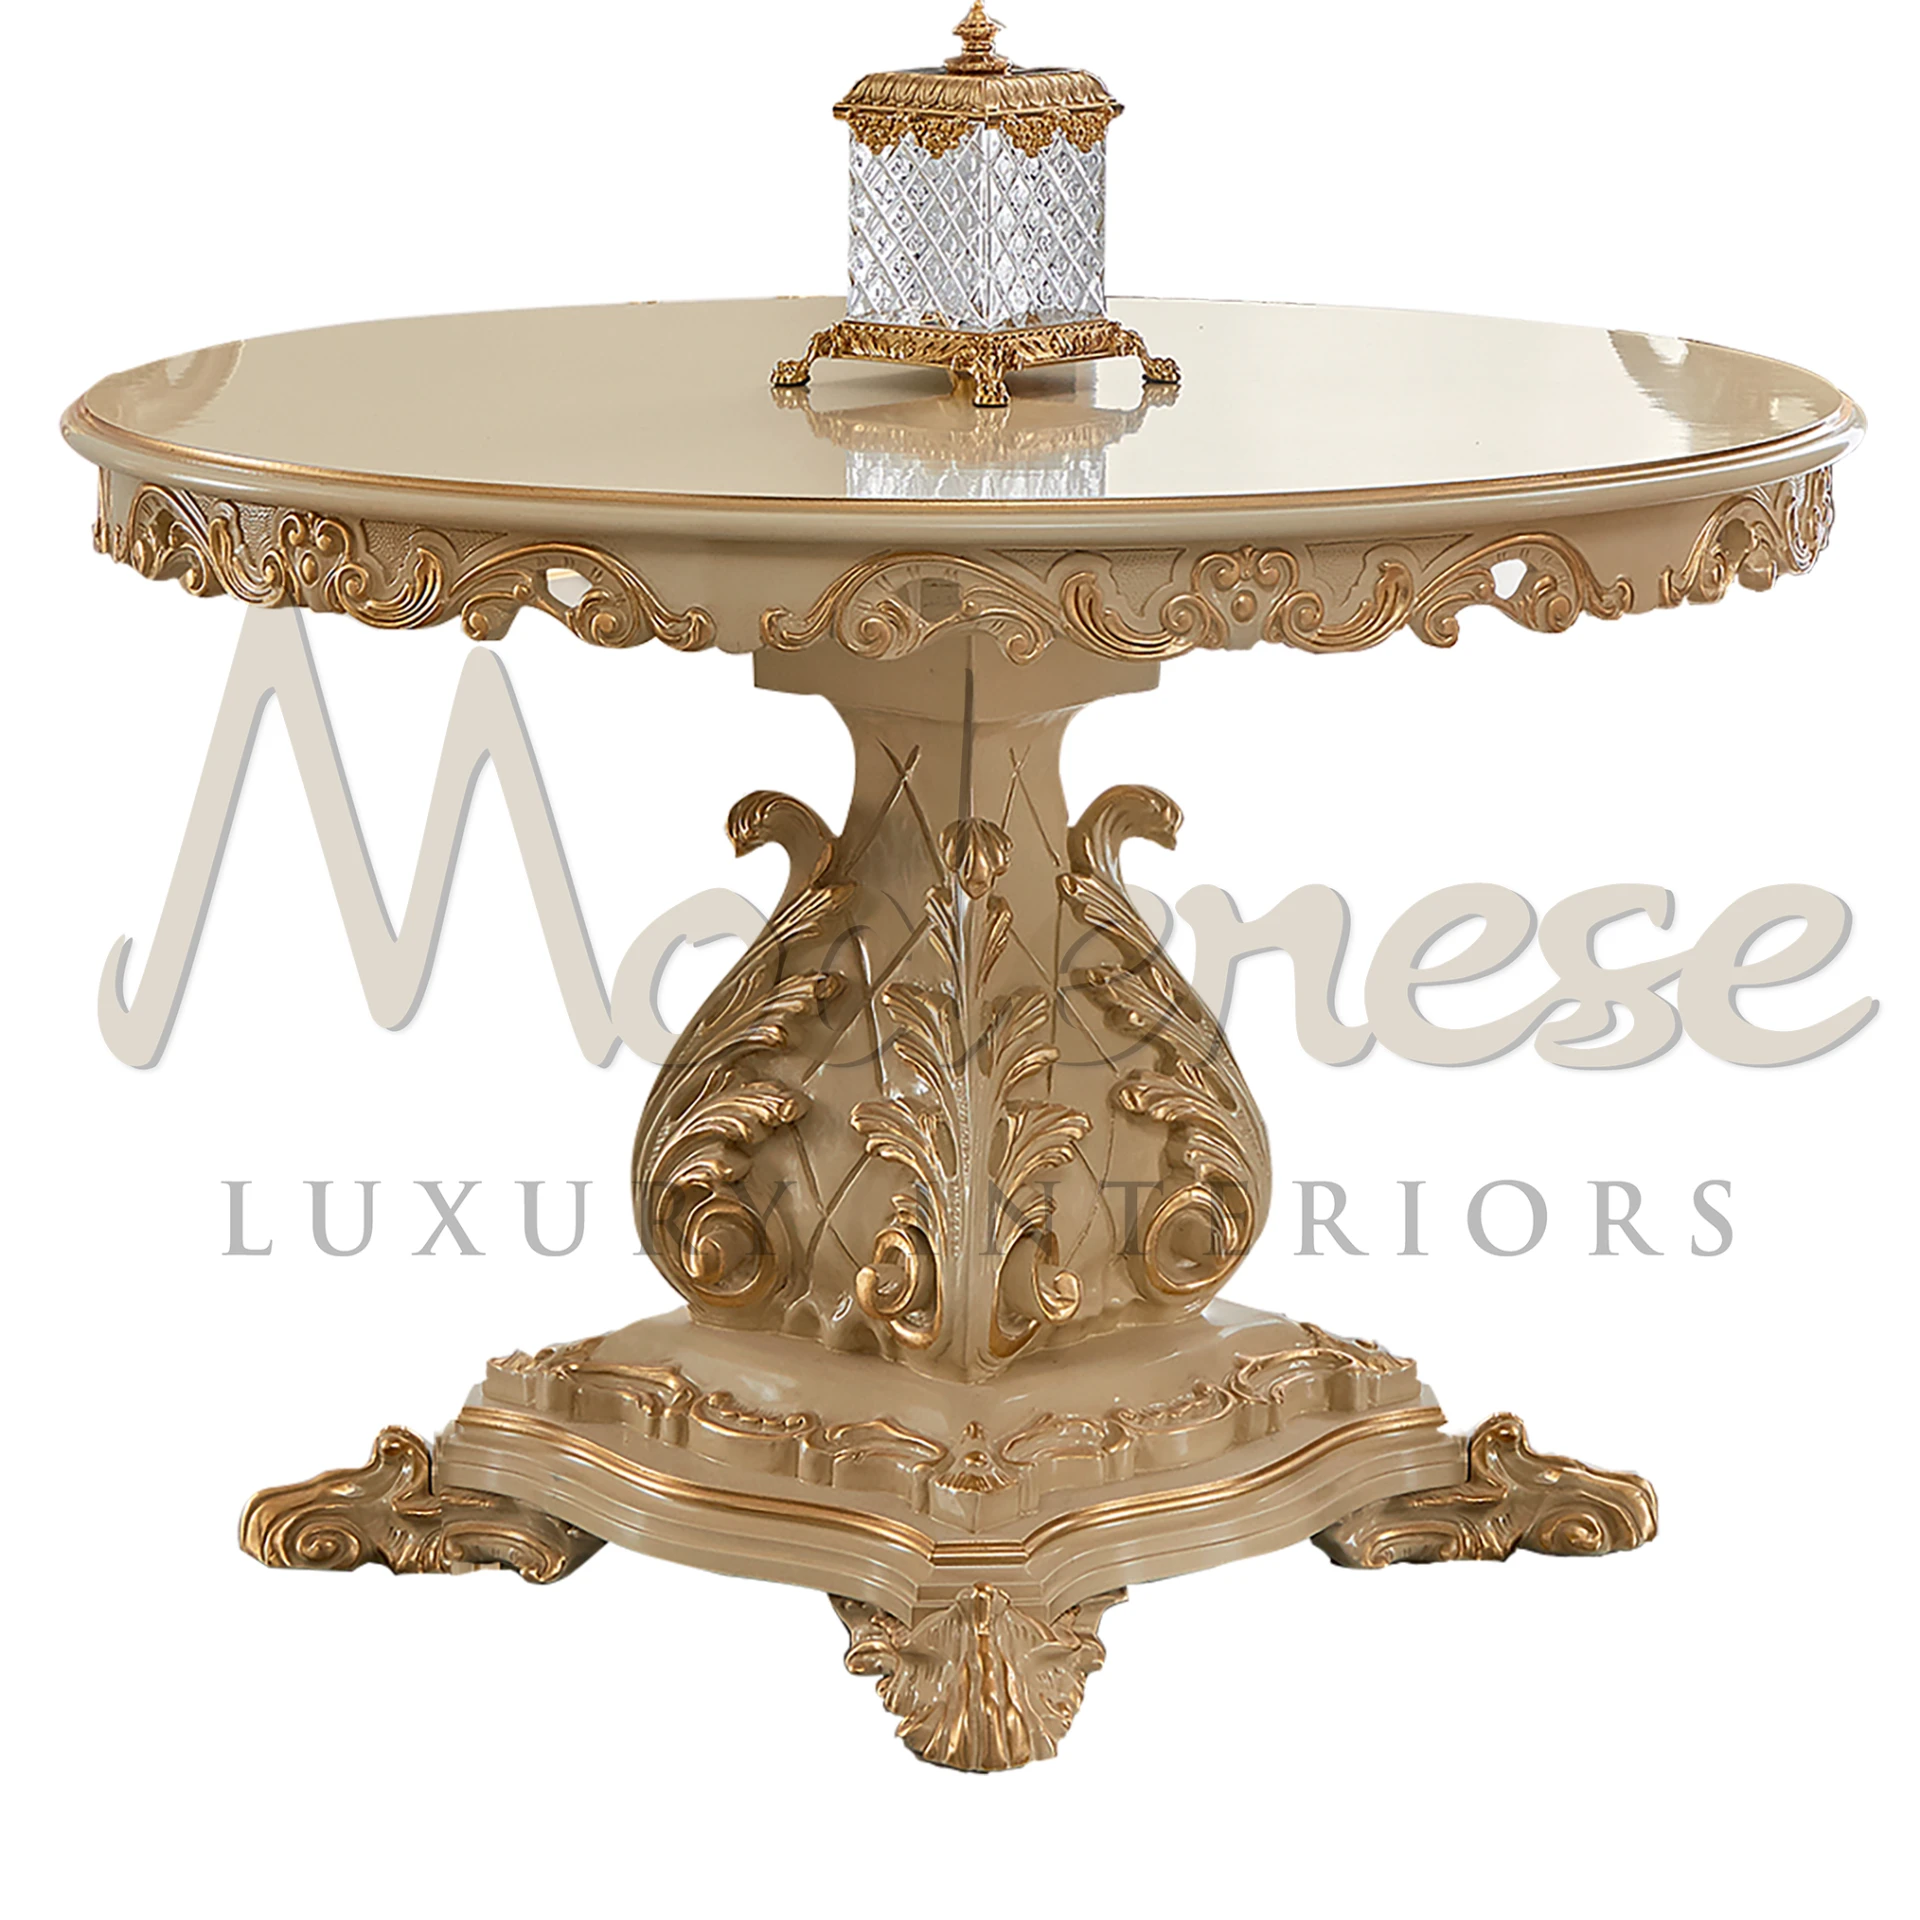 Elegant Rococo Gold Leaf Hand-gilded Central Table, showcasing luxurious gold leaf carvings, perfect for classic home decor.